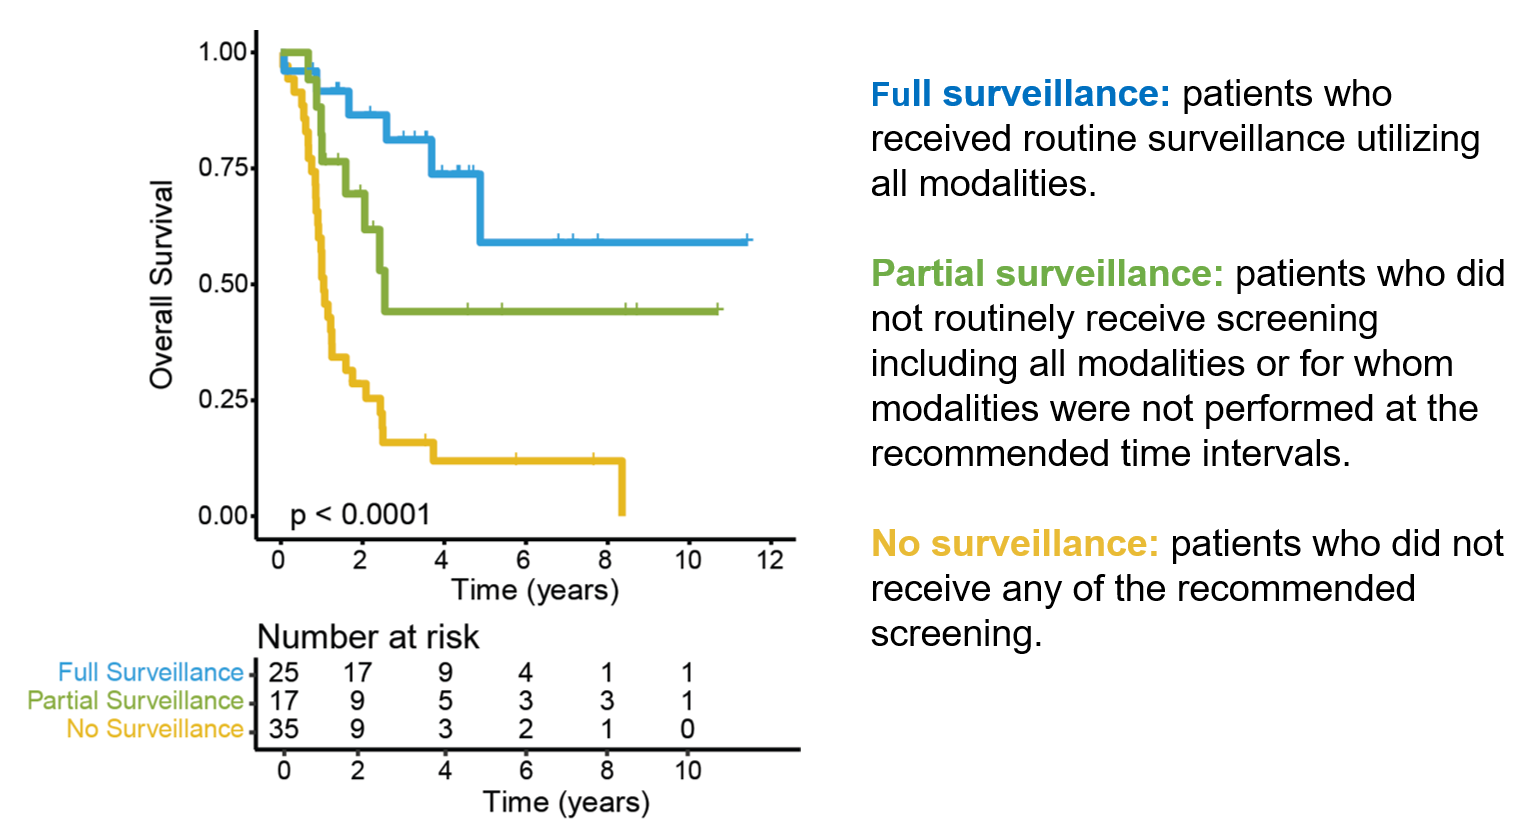 A bar graph comparing survival (y) over time (x) for CMMRD patients. The graph compares full surveillance (blue), partial surveillance (green) and no surveillance (yellow). Survival decreases over time for all groups, but overall survival is much higher for full surveillance than no surveillance patients. 